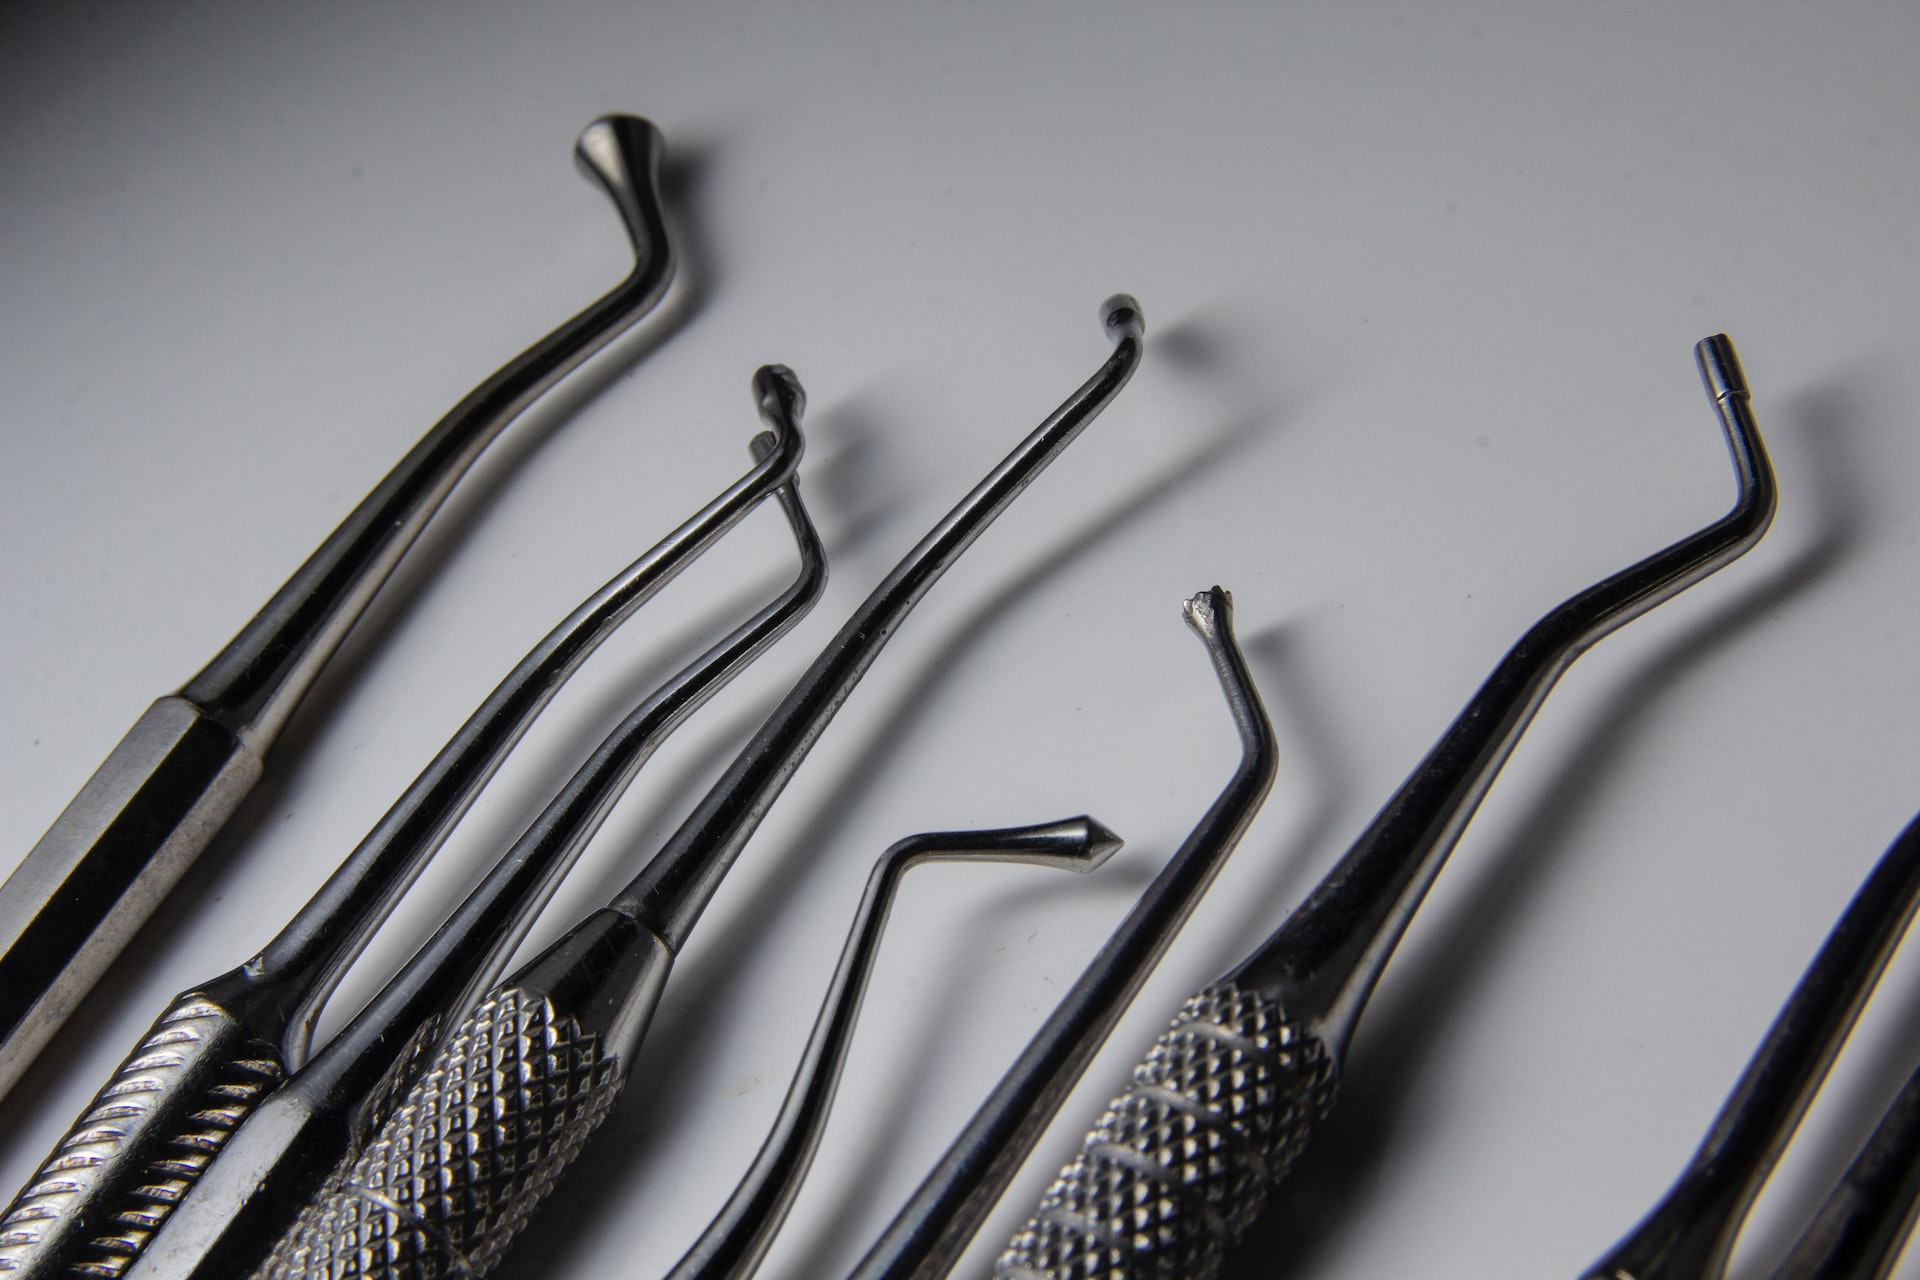 What Tools Are Used In Root Canals? - East Coast Endodontics